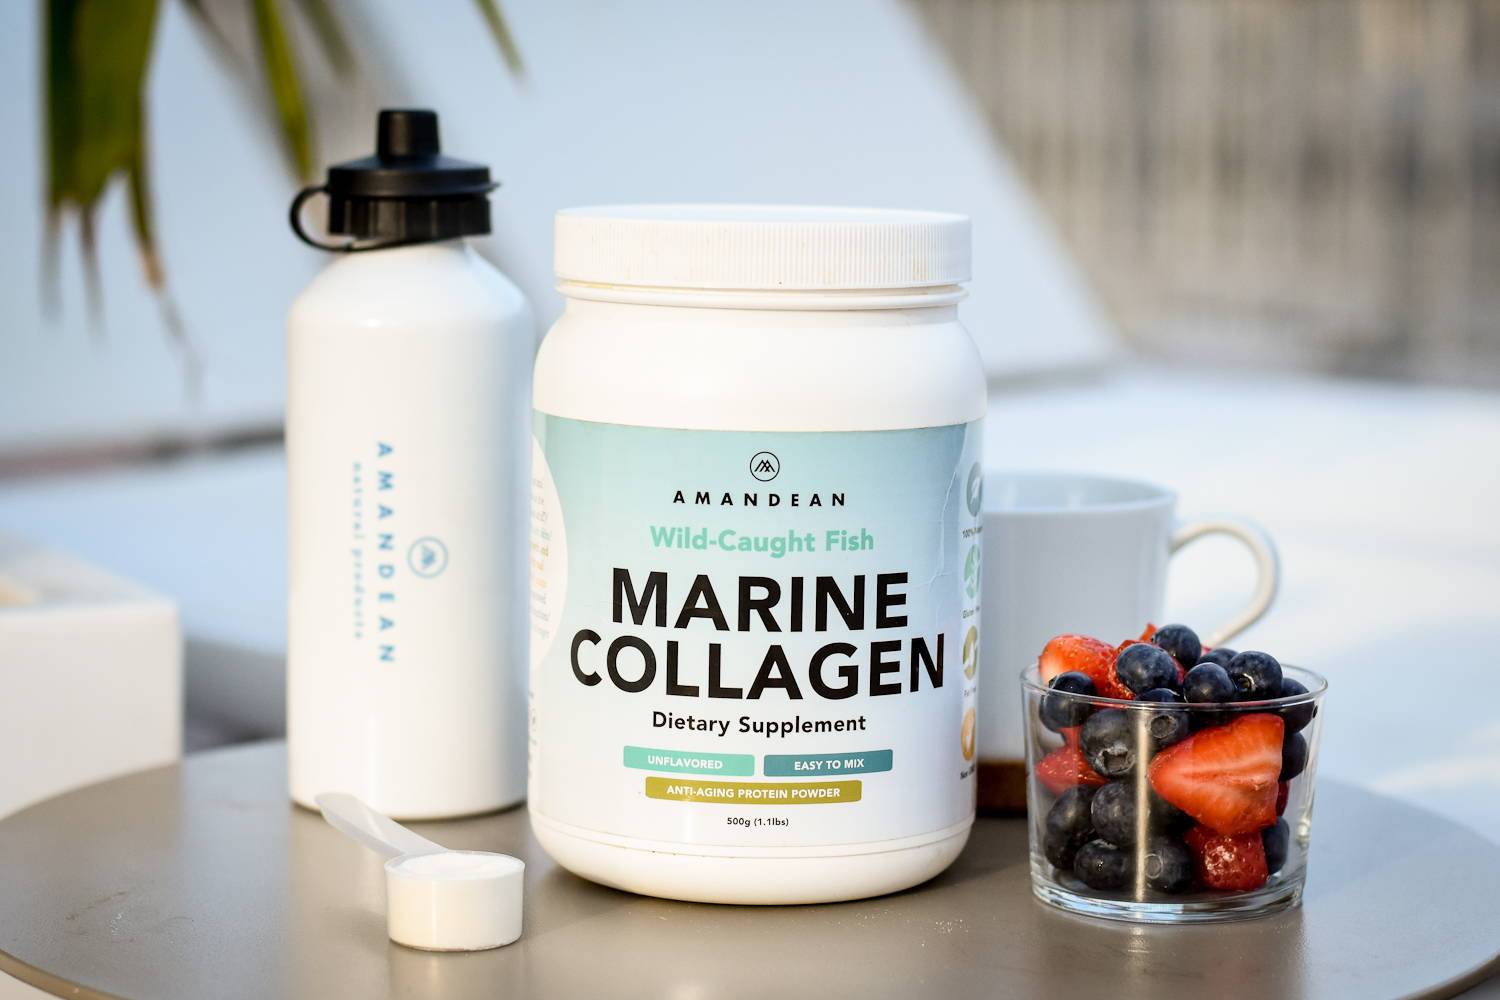 "I have been using Marine Collagen for a year and I feel like I should buy stock in this company!"